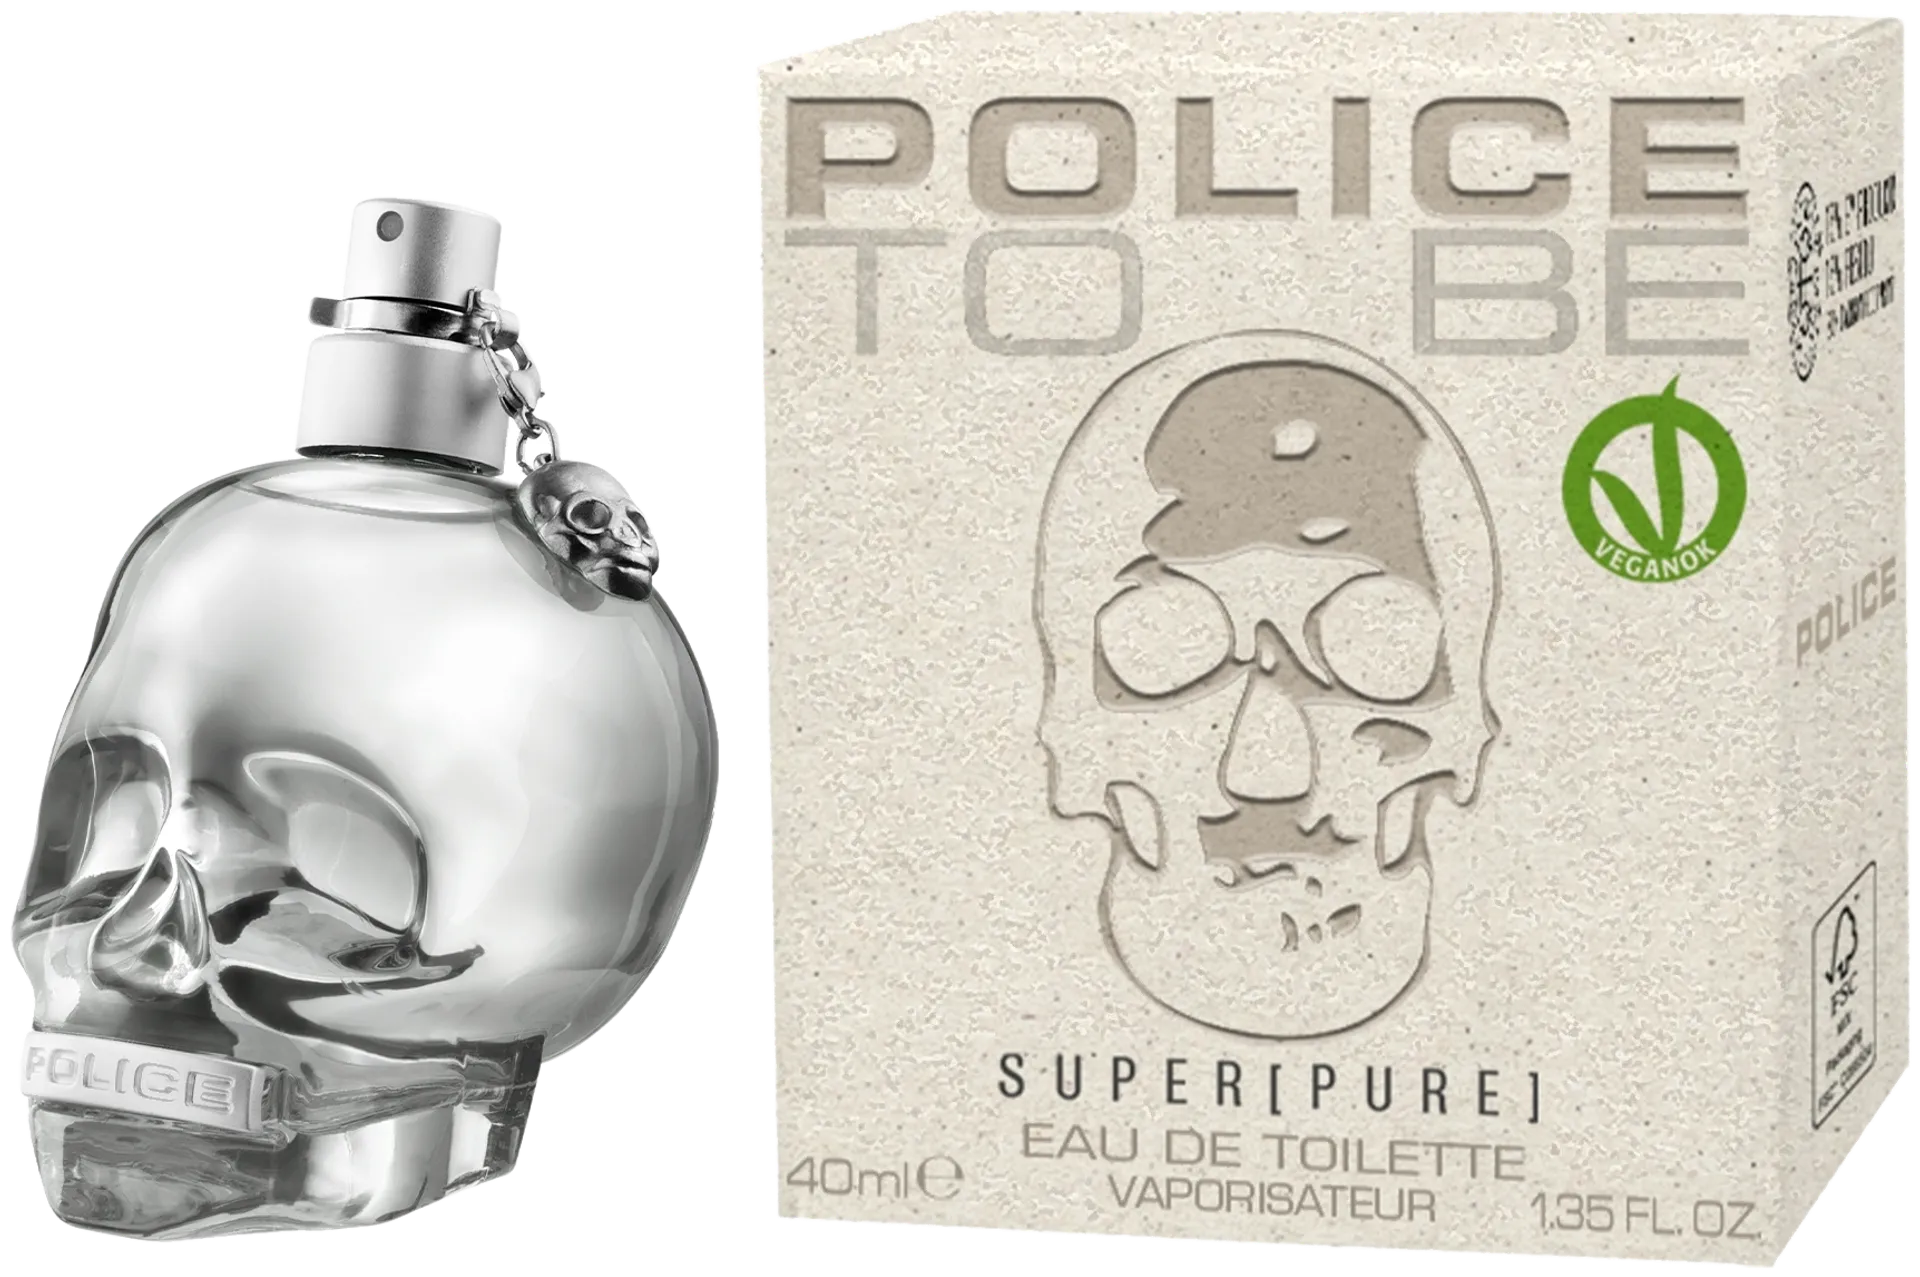 Police To Be Super(Pure) EdT 40ml